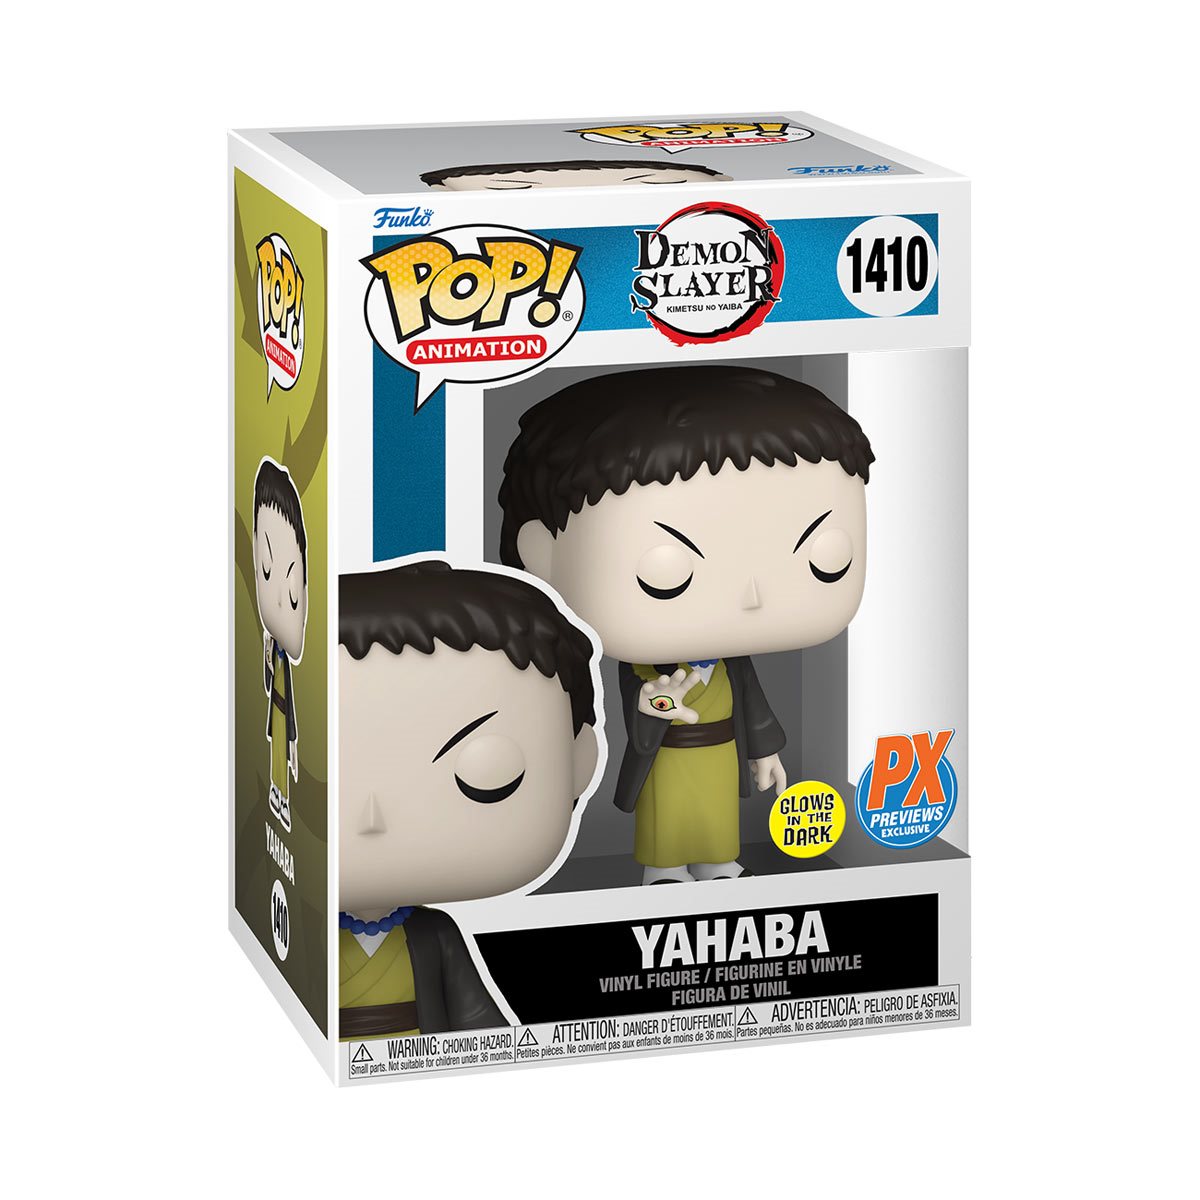 Pre Order Yahaba GITD Px Exclusive  (SRP 1300)